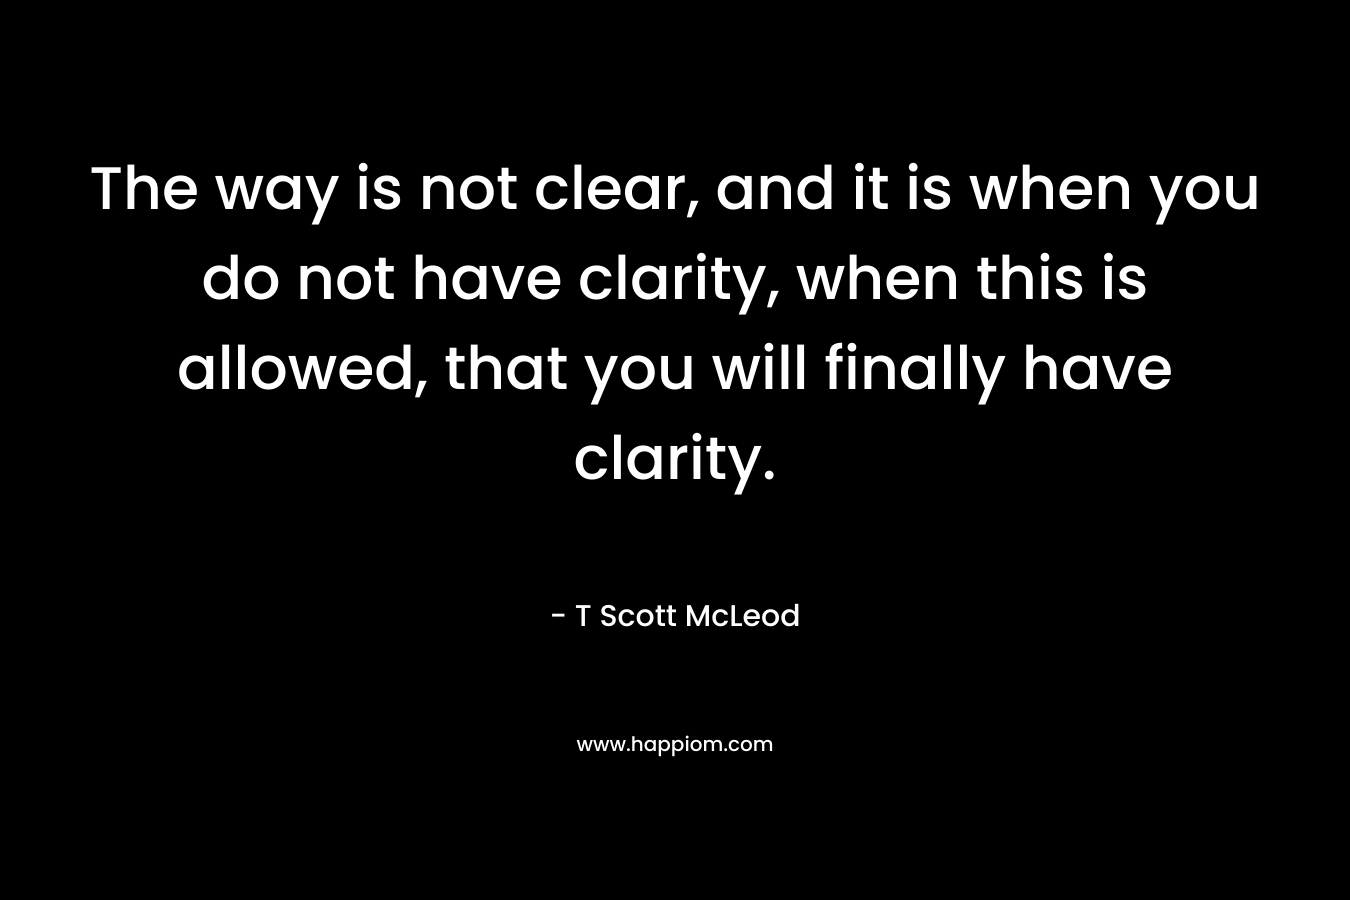 The way is not clear, and it is when you do not have clarity, when this is allowed, that you will finally have clarity.